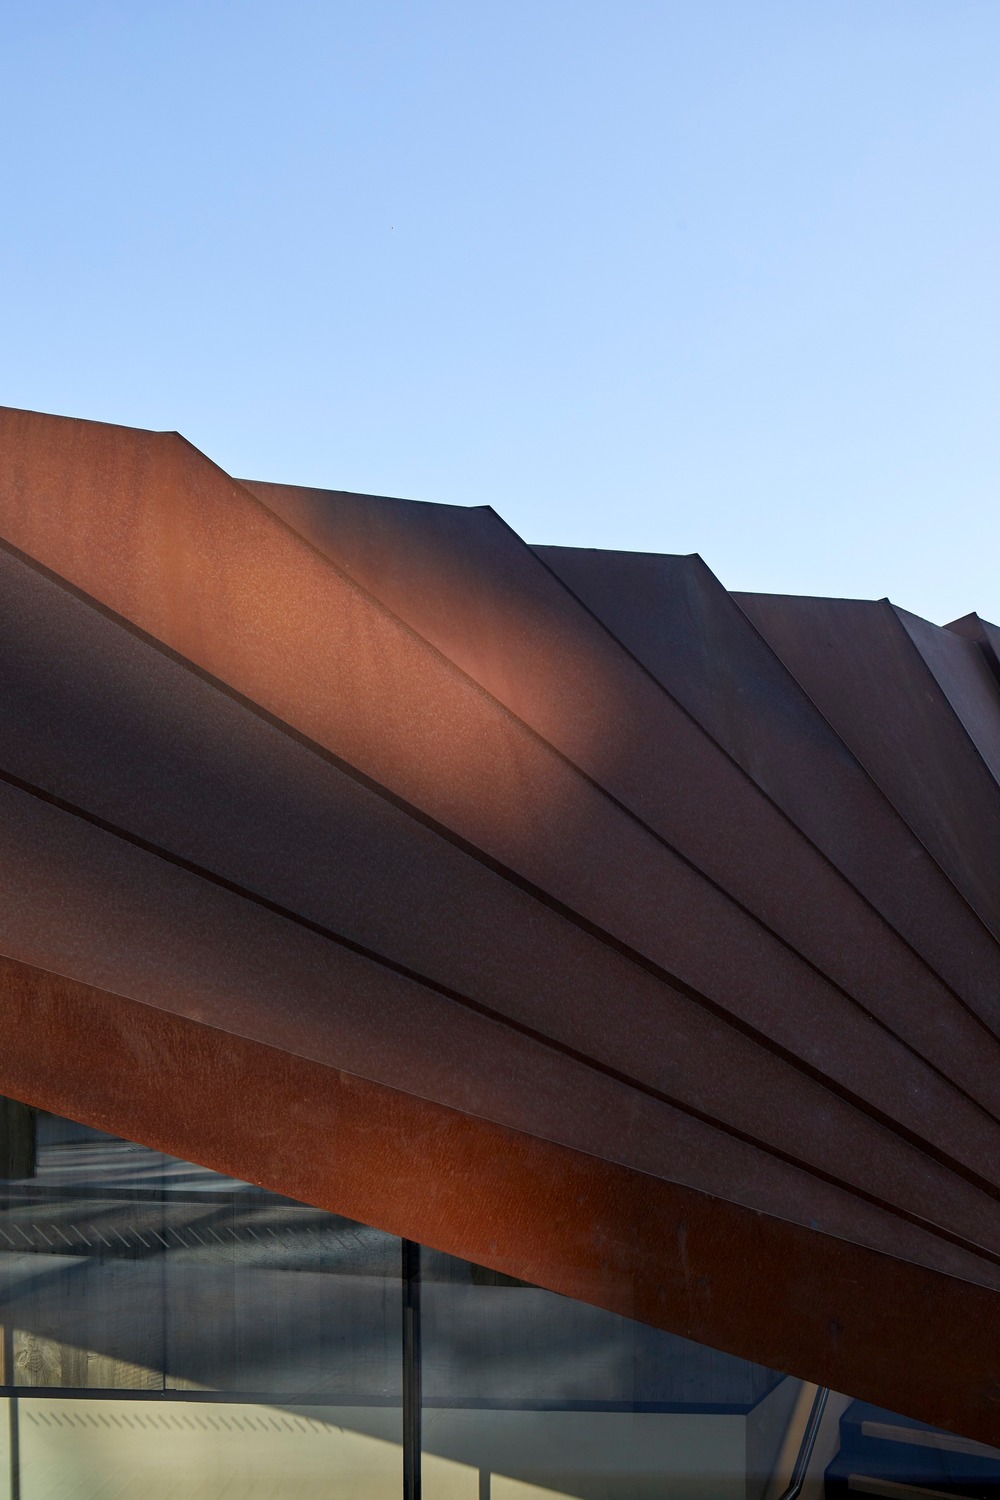 Details of the angles on the pavilion roof